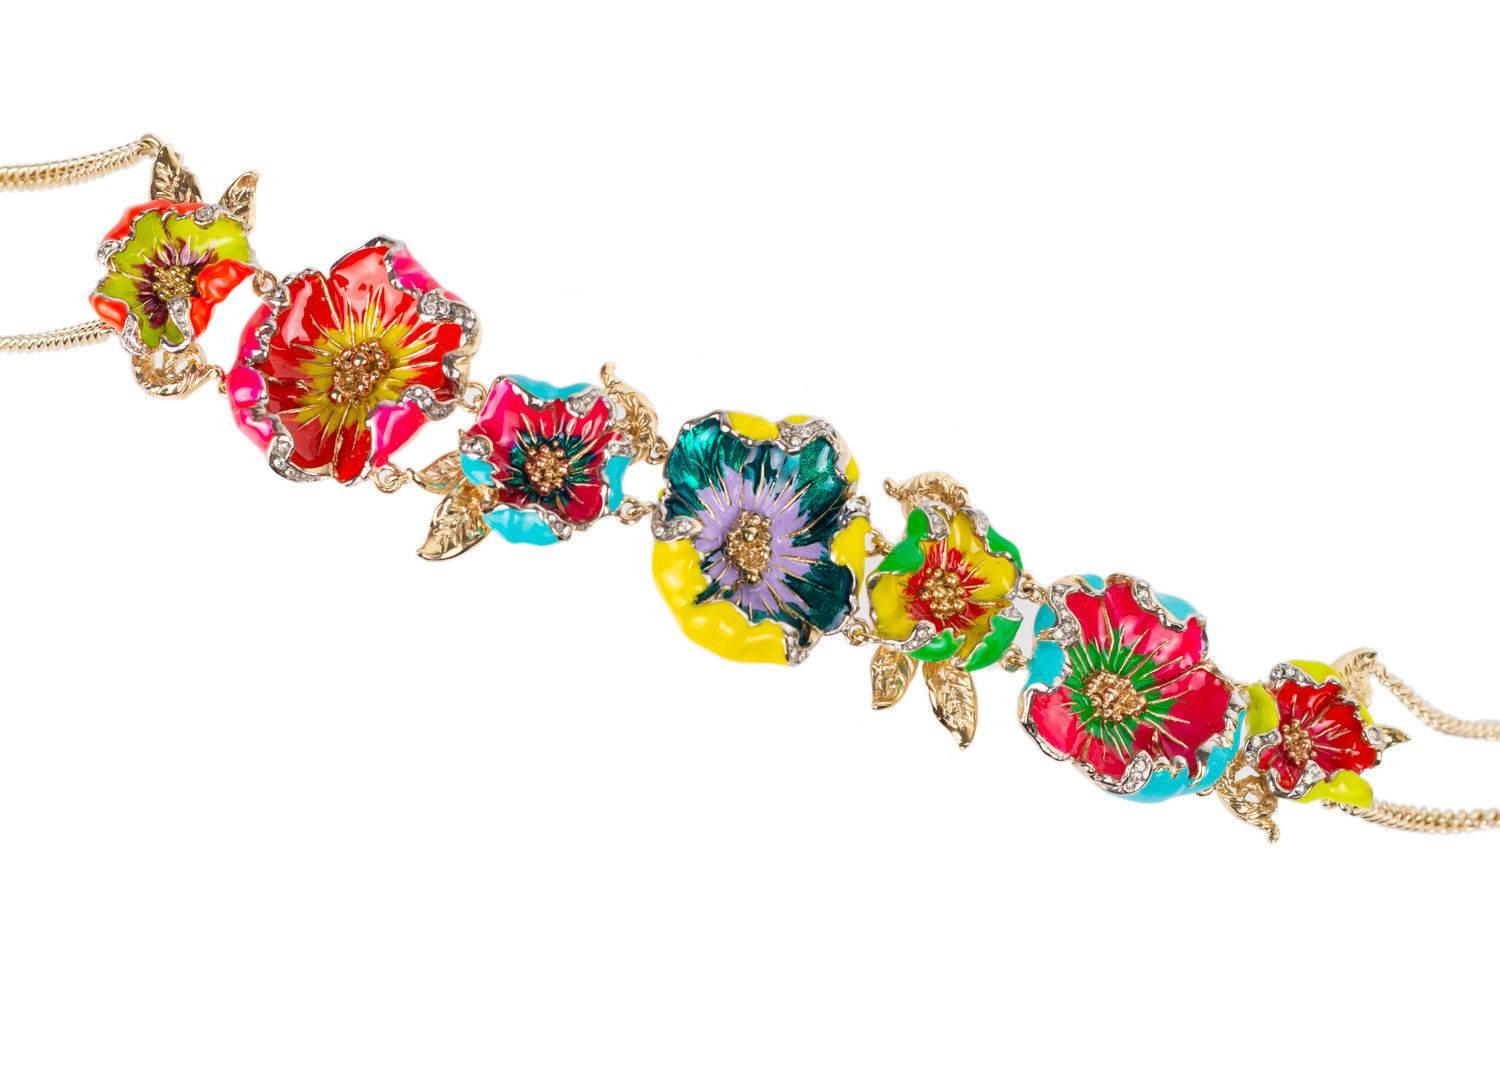 Roberto Cavallis Floral necklace is the perfect piece to start the spring summer season with. This gold toned beauty features multicolored blossoming linked floral embellishments double reinforced gold chains and the ideal lobster clasp closure. You